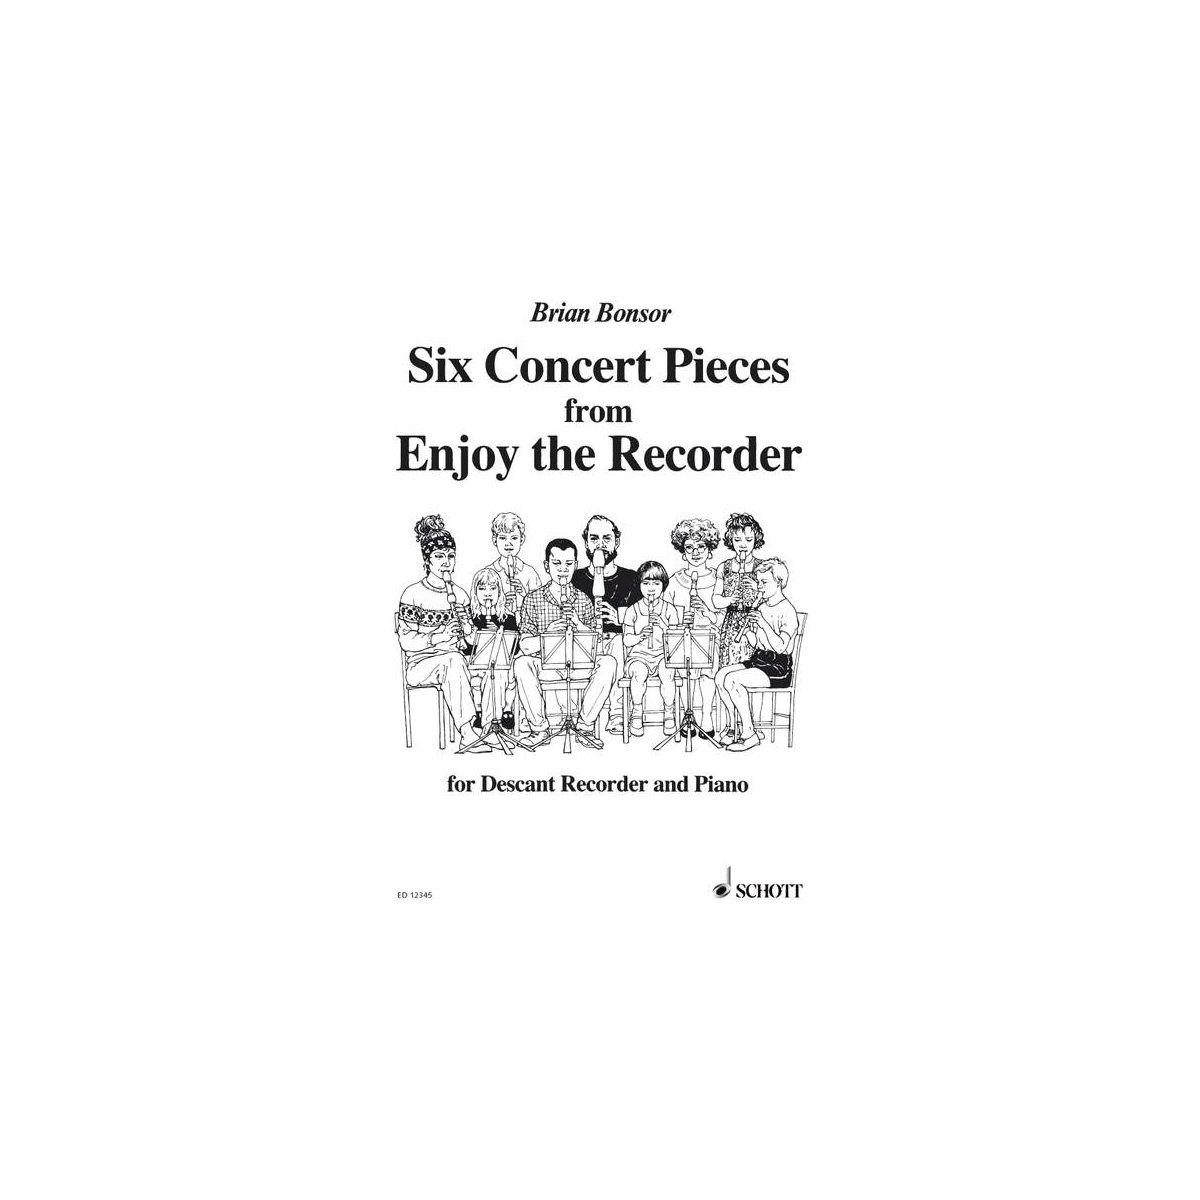 Six Concert Pieces from Enjoy the Recorder